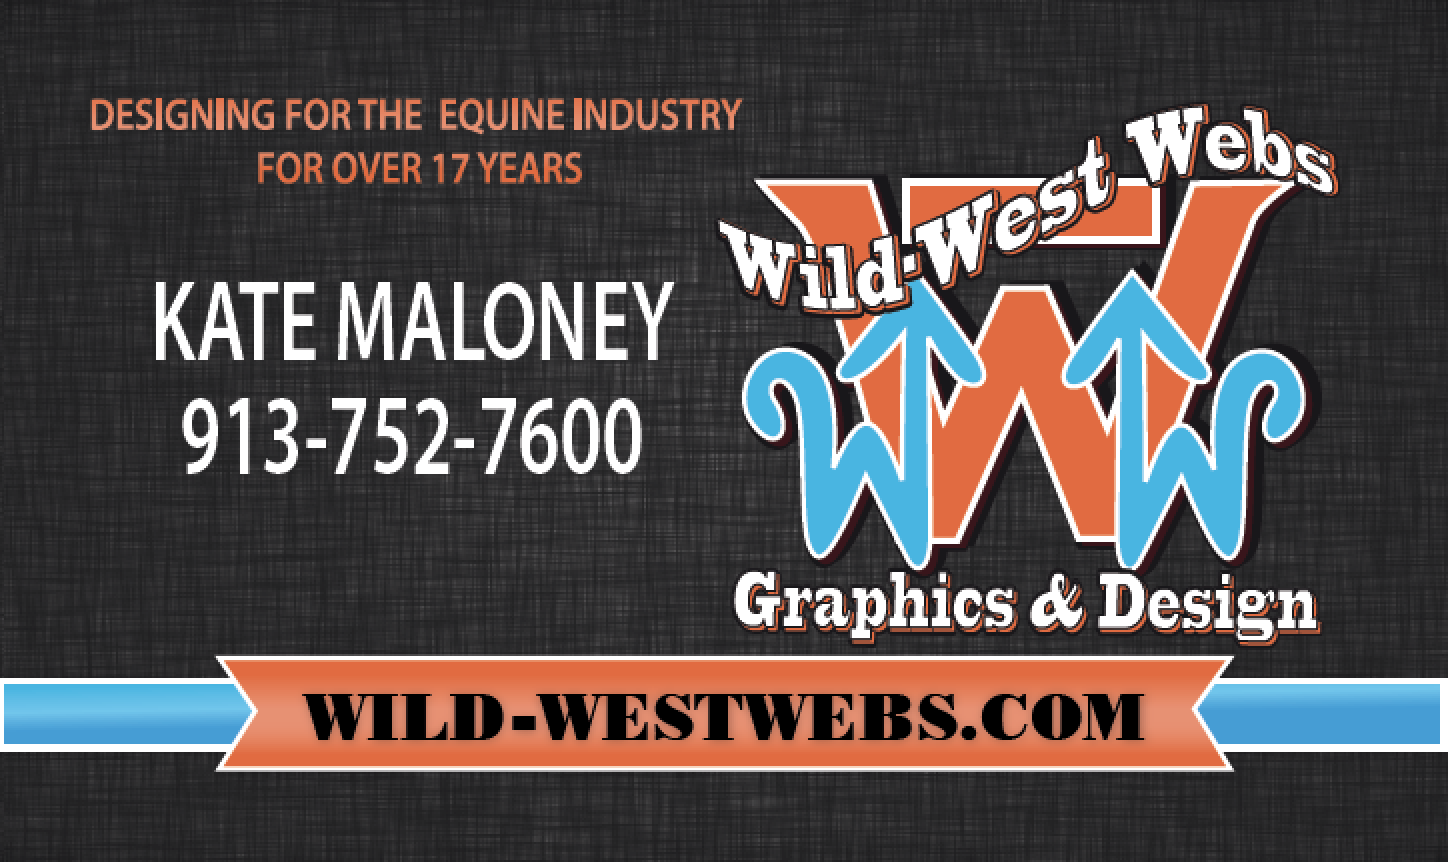 Wild-West Webs and Graphics